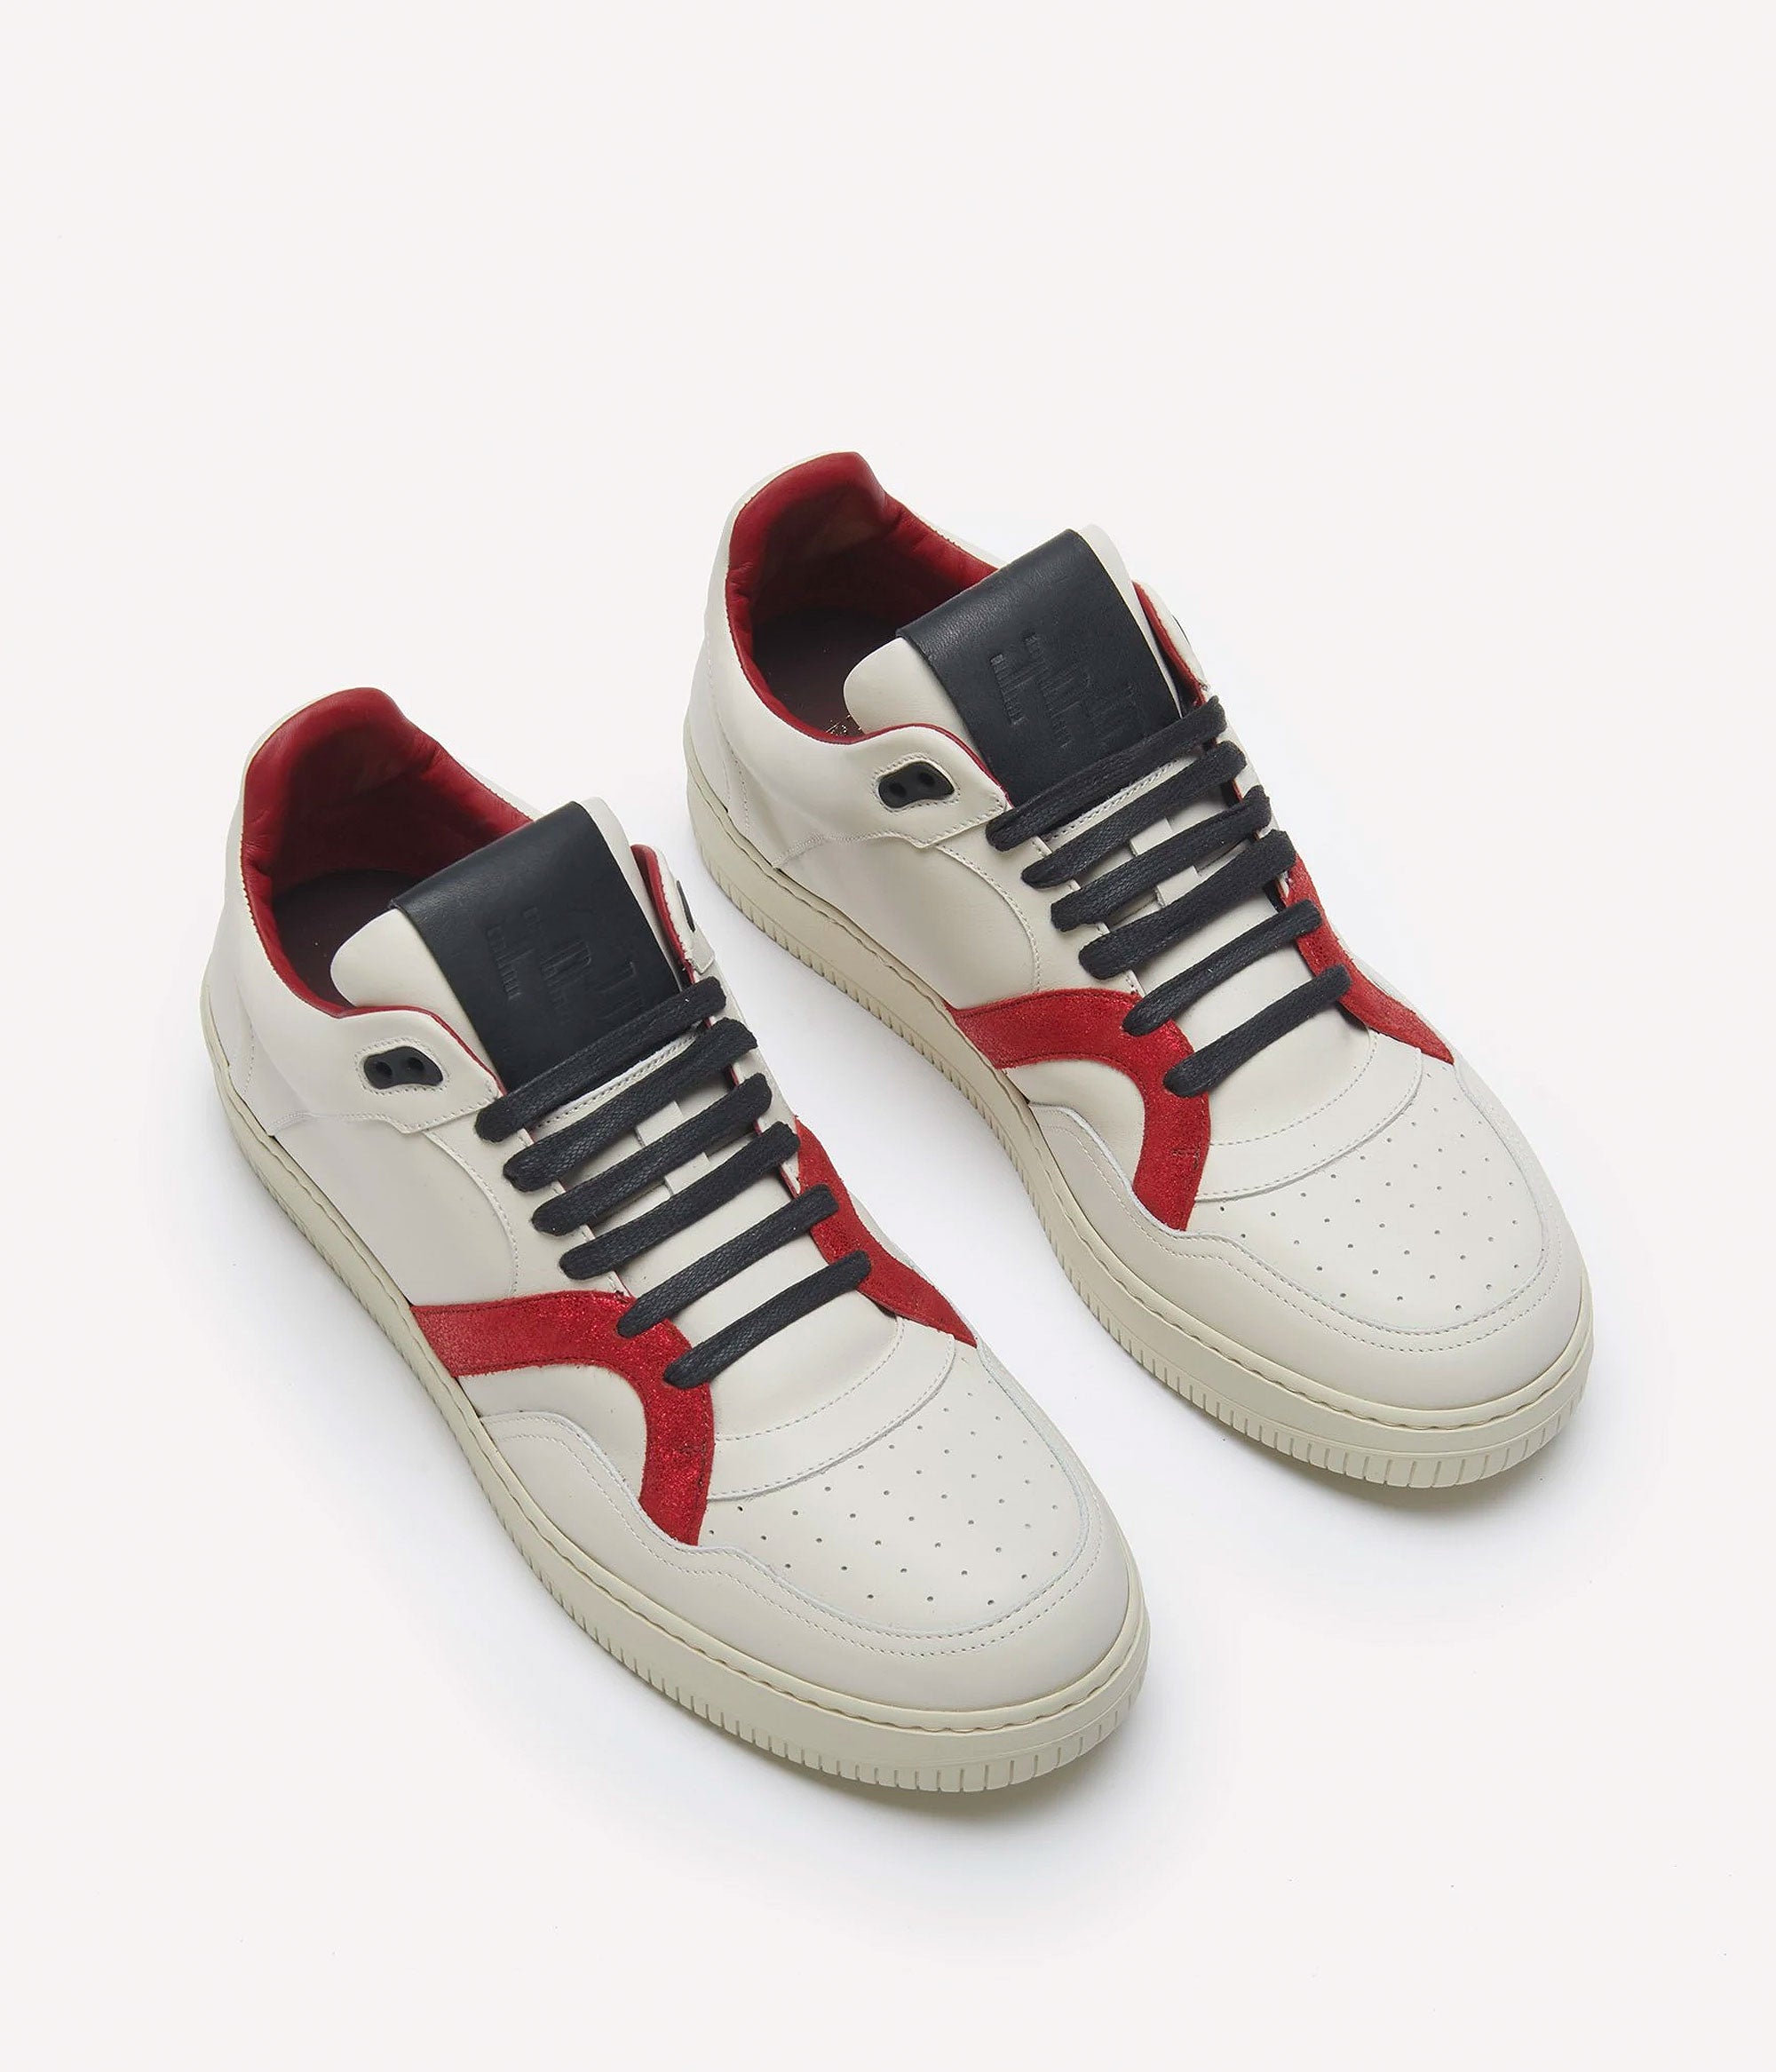 HUMAN RECREATIONAL SERVICES MONGOOSE LOW SHOE IN BONE AND RED MADE WITH ITALIAN CALF SKIN